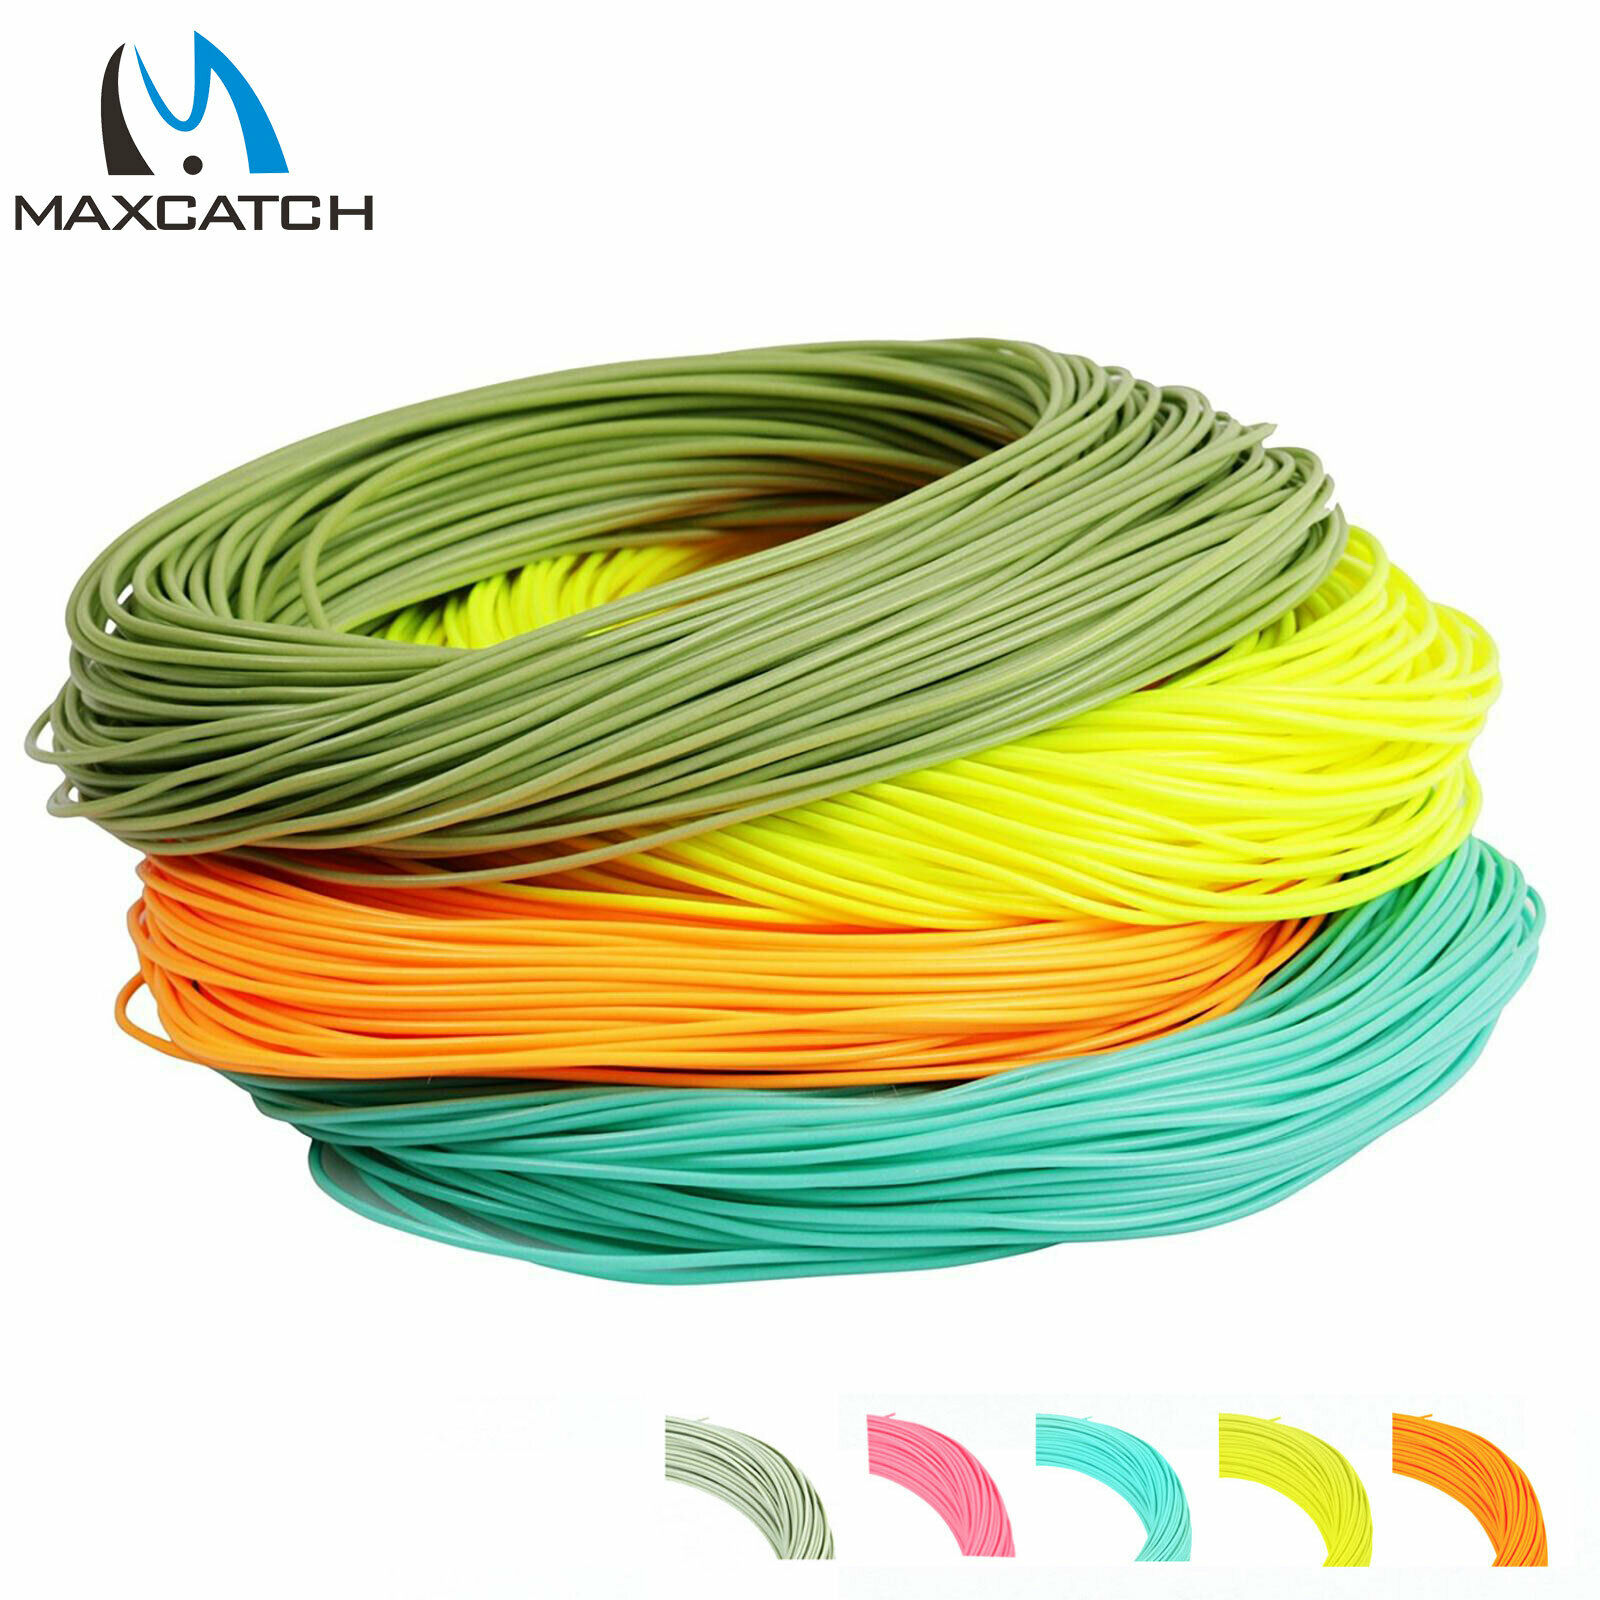 Maxcatch Floating Fly Fishing Line Wf1/2/3/4/5/6/7/8/9wt Weight Forward All Size